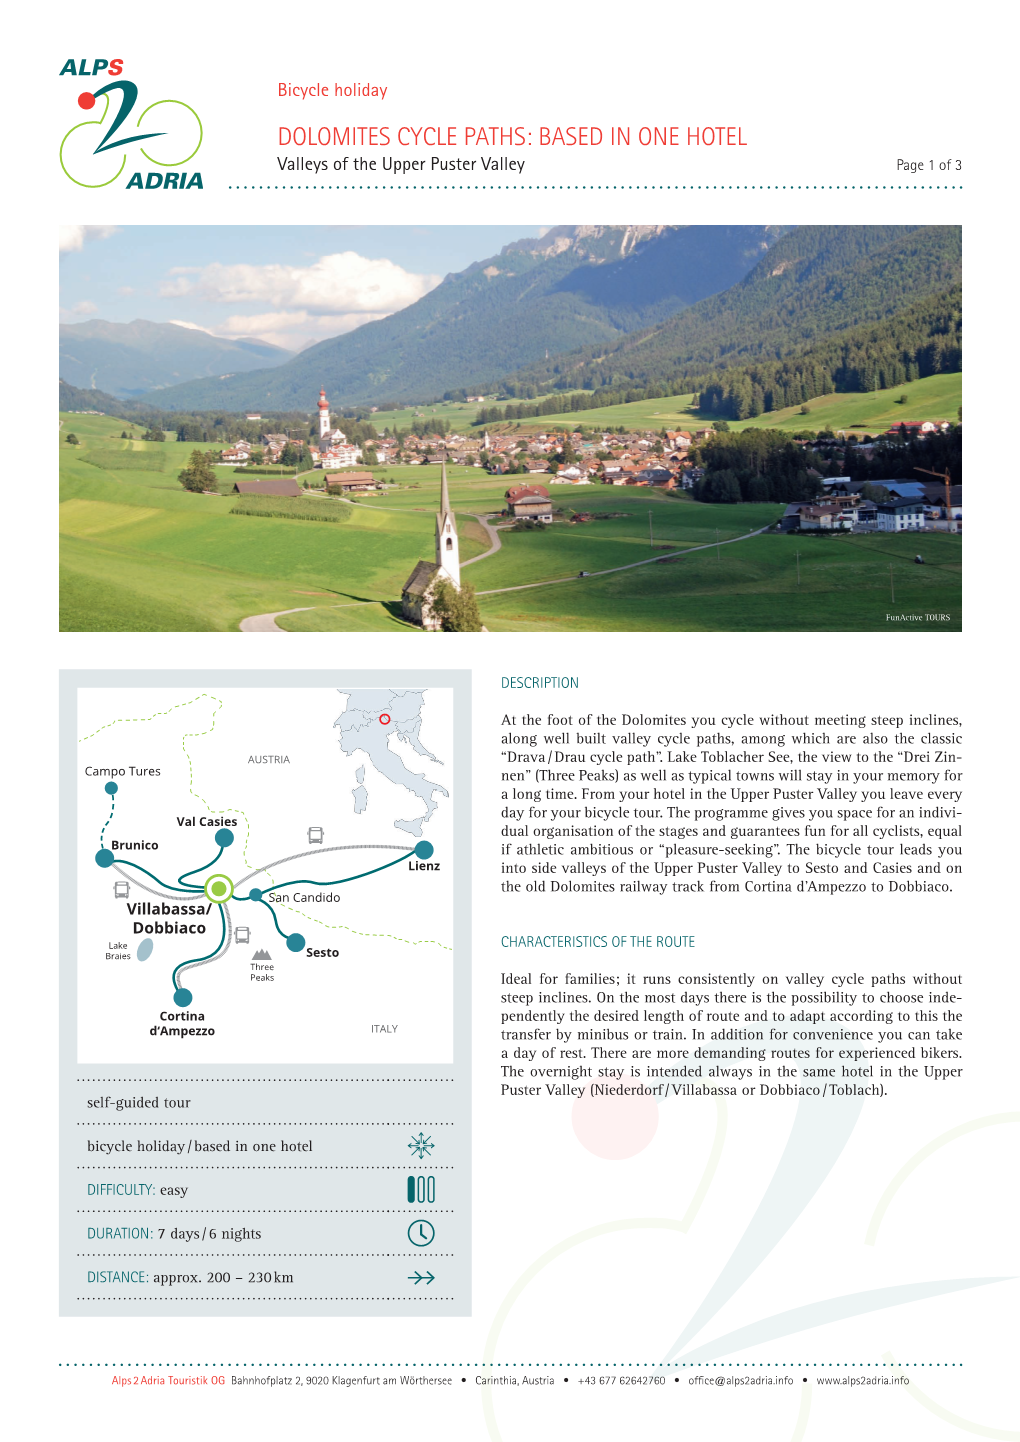 DOLOMITES CYCLE PATHS: BASED in ONE HOTEL Valleys of the Upper Puster Valley Page 1 of 3